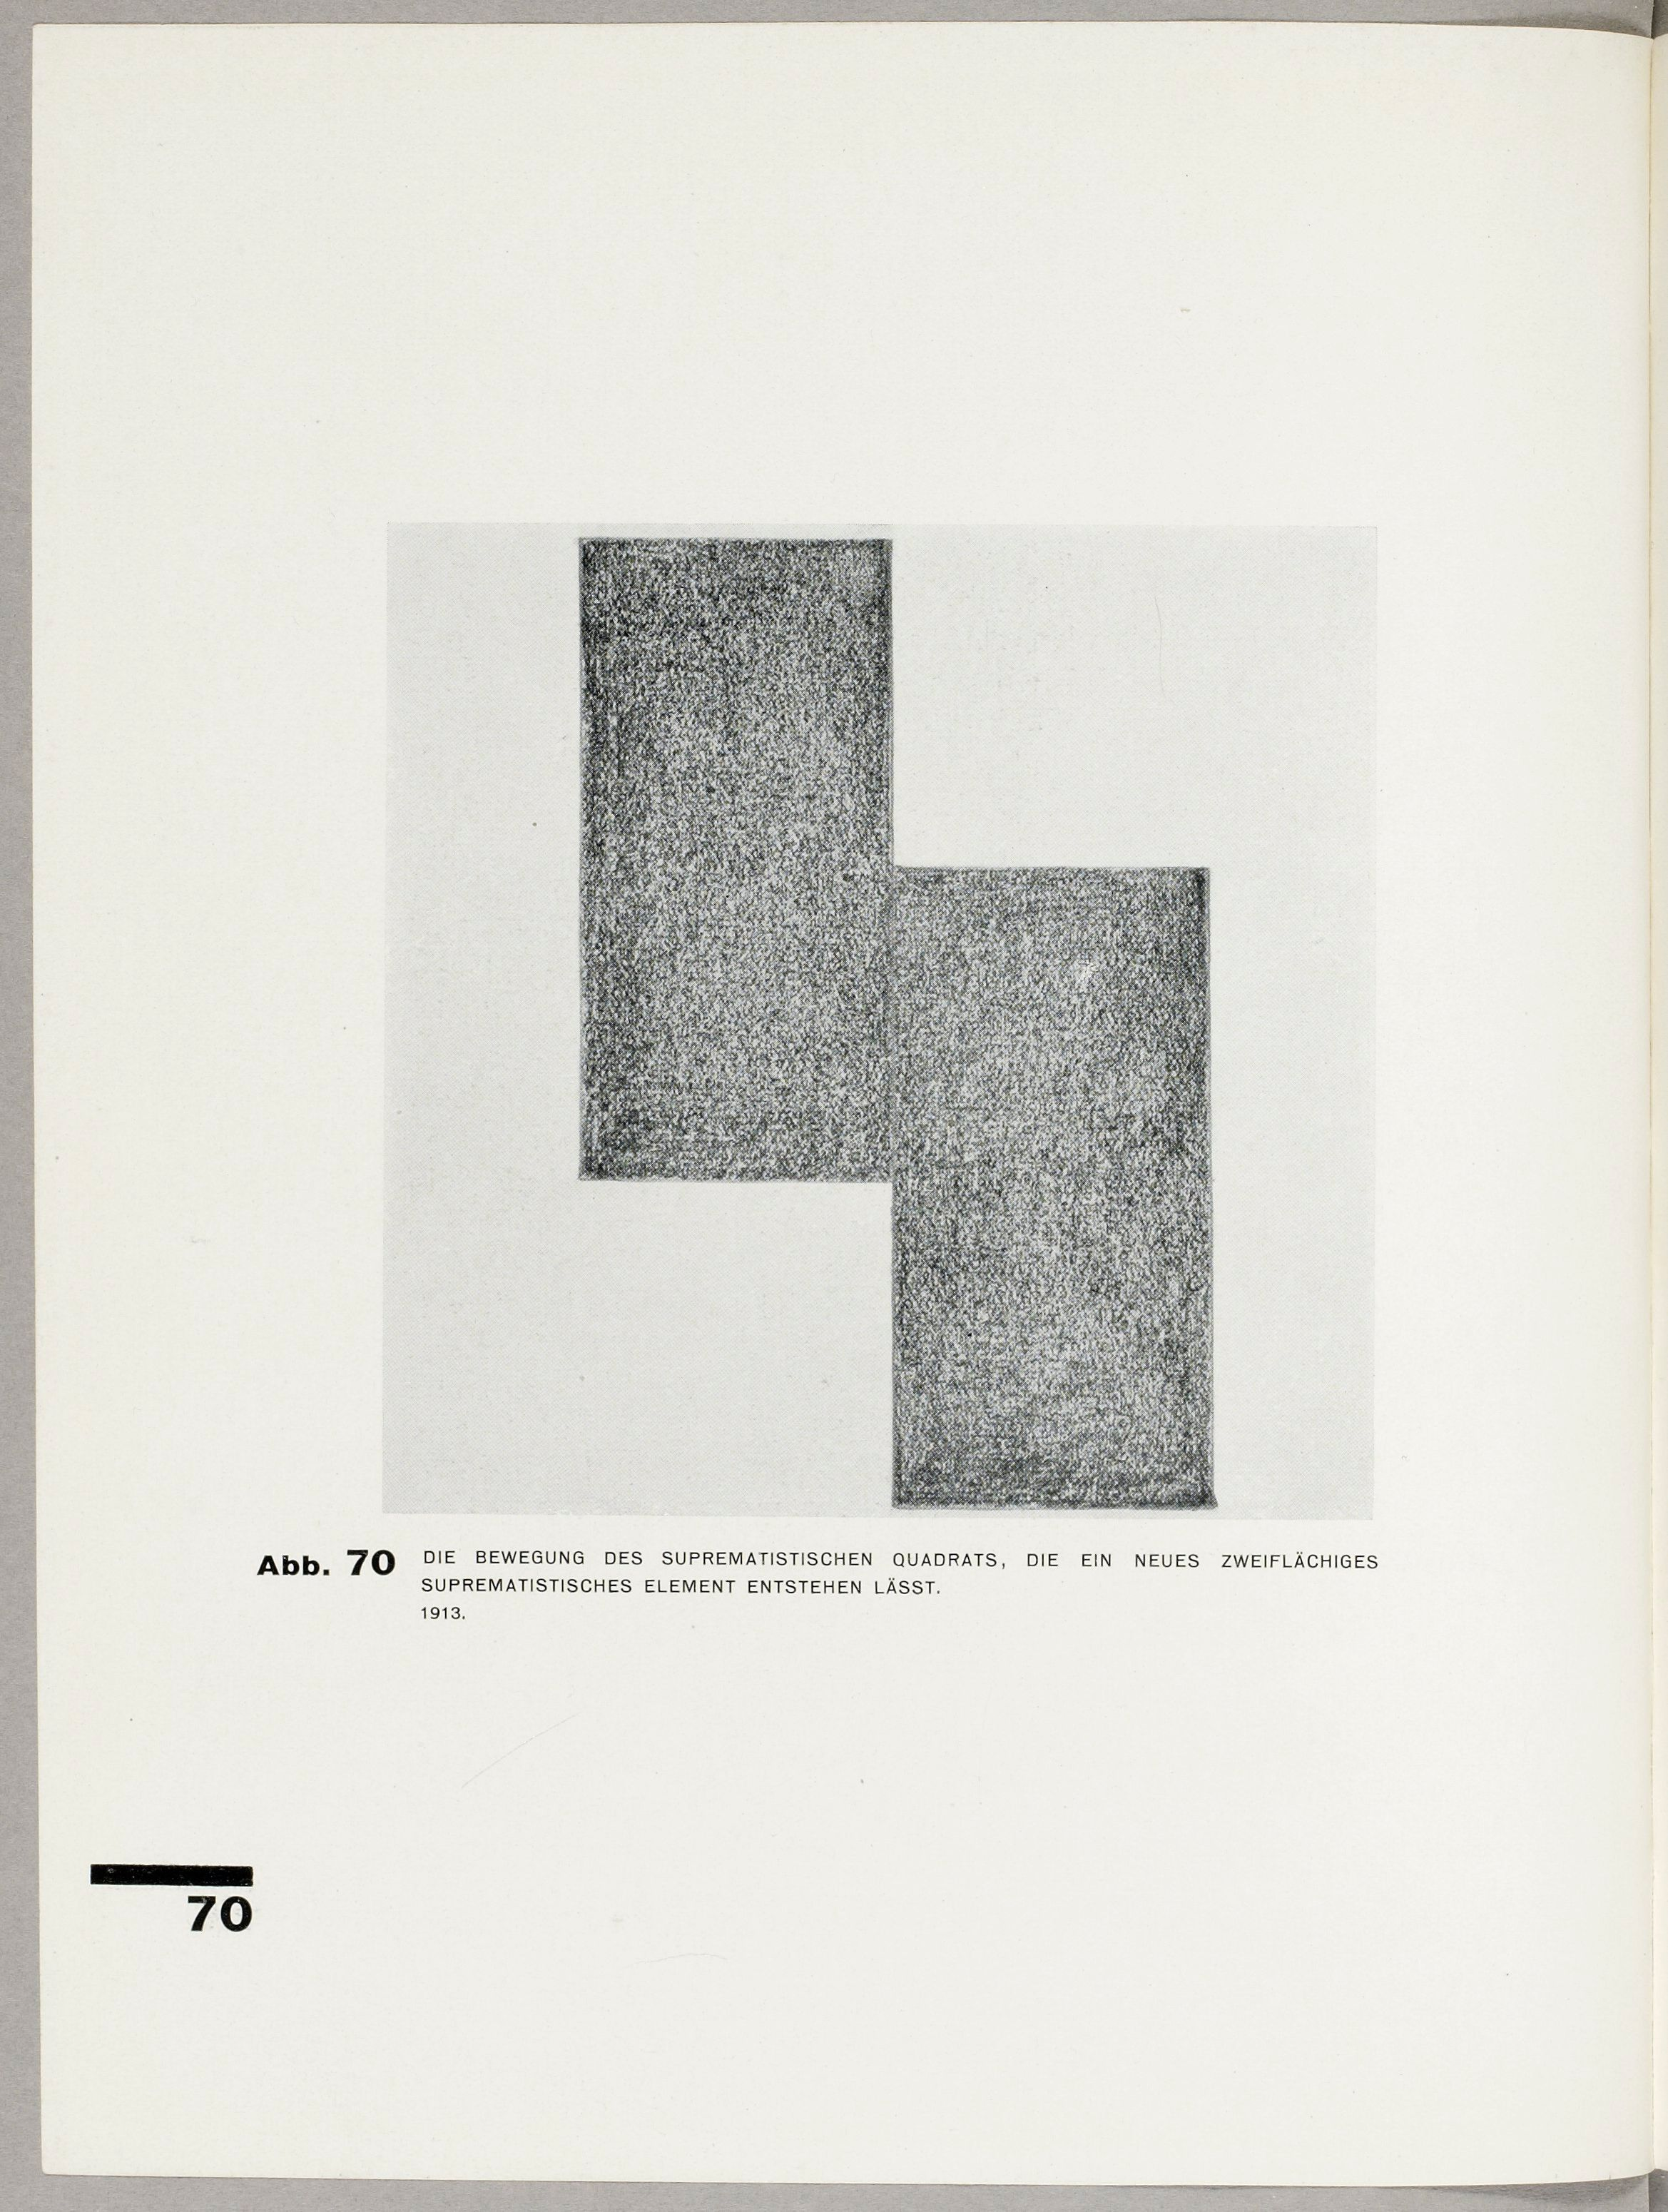 The Movement of the Suprematistic Square, Which Constitutes a New Dihedral Suprematistic Element (1927).